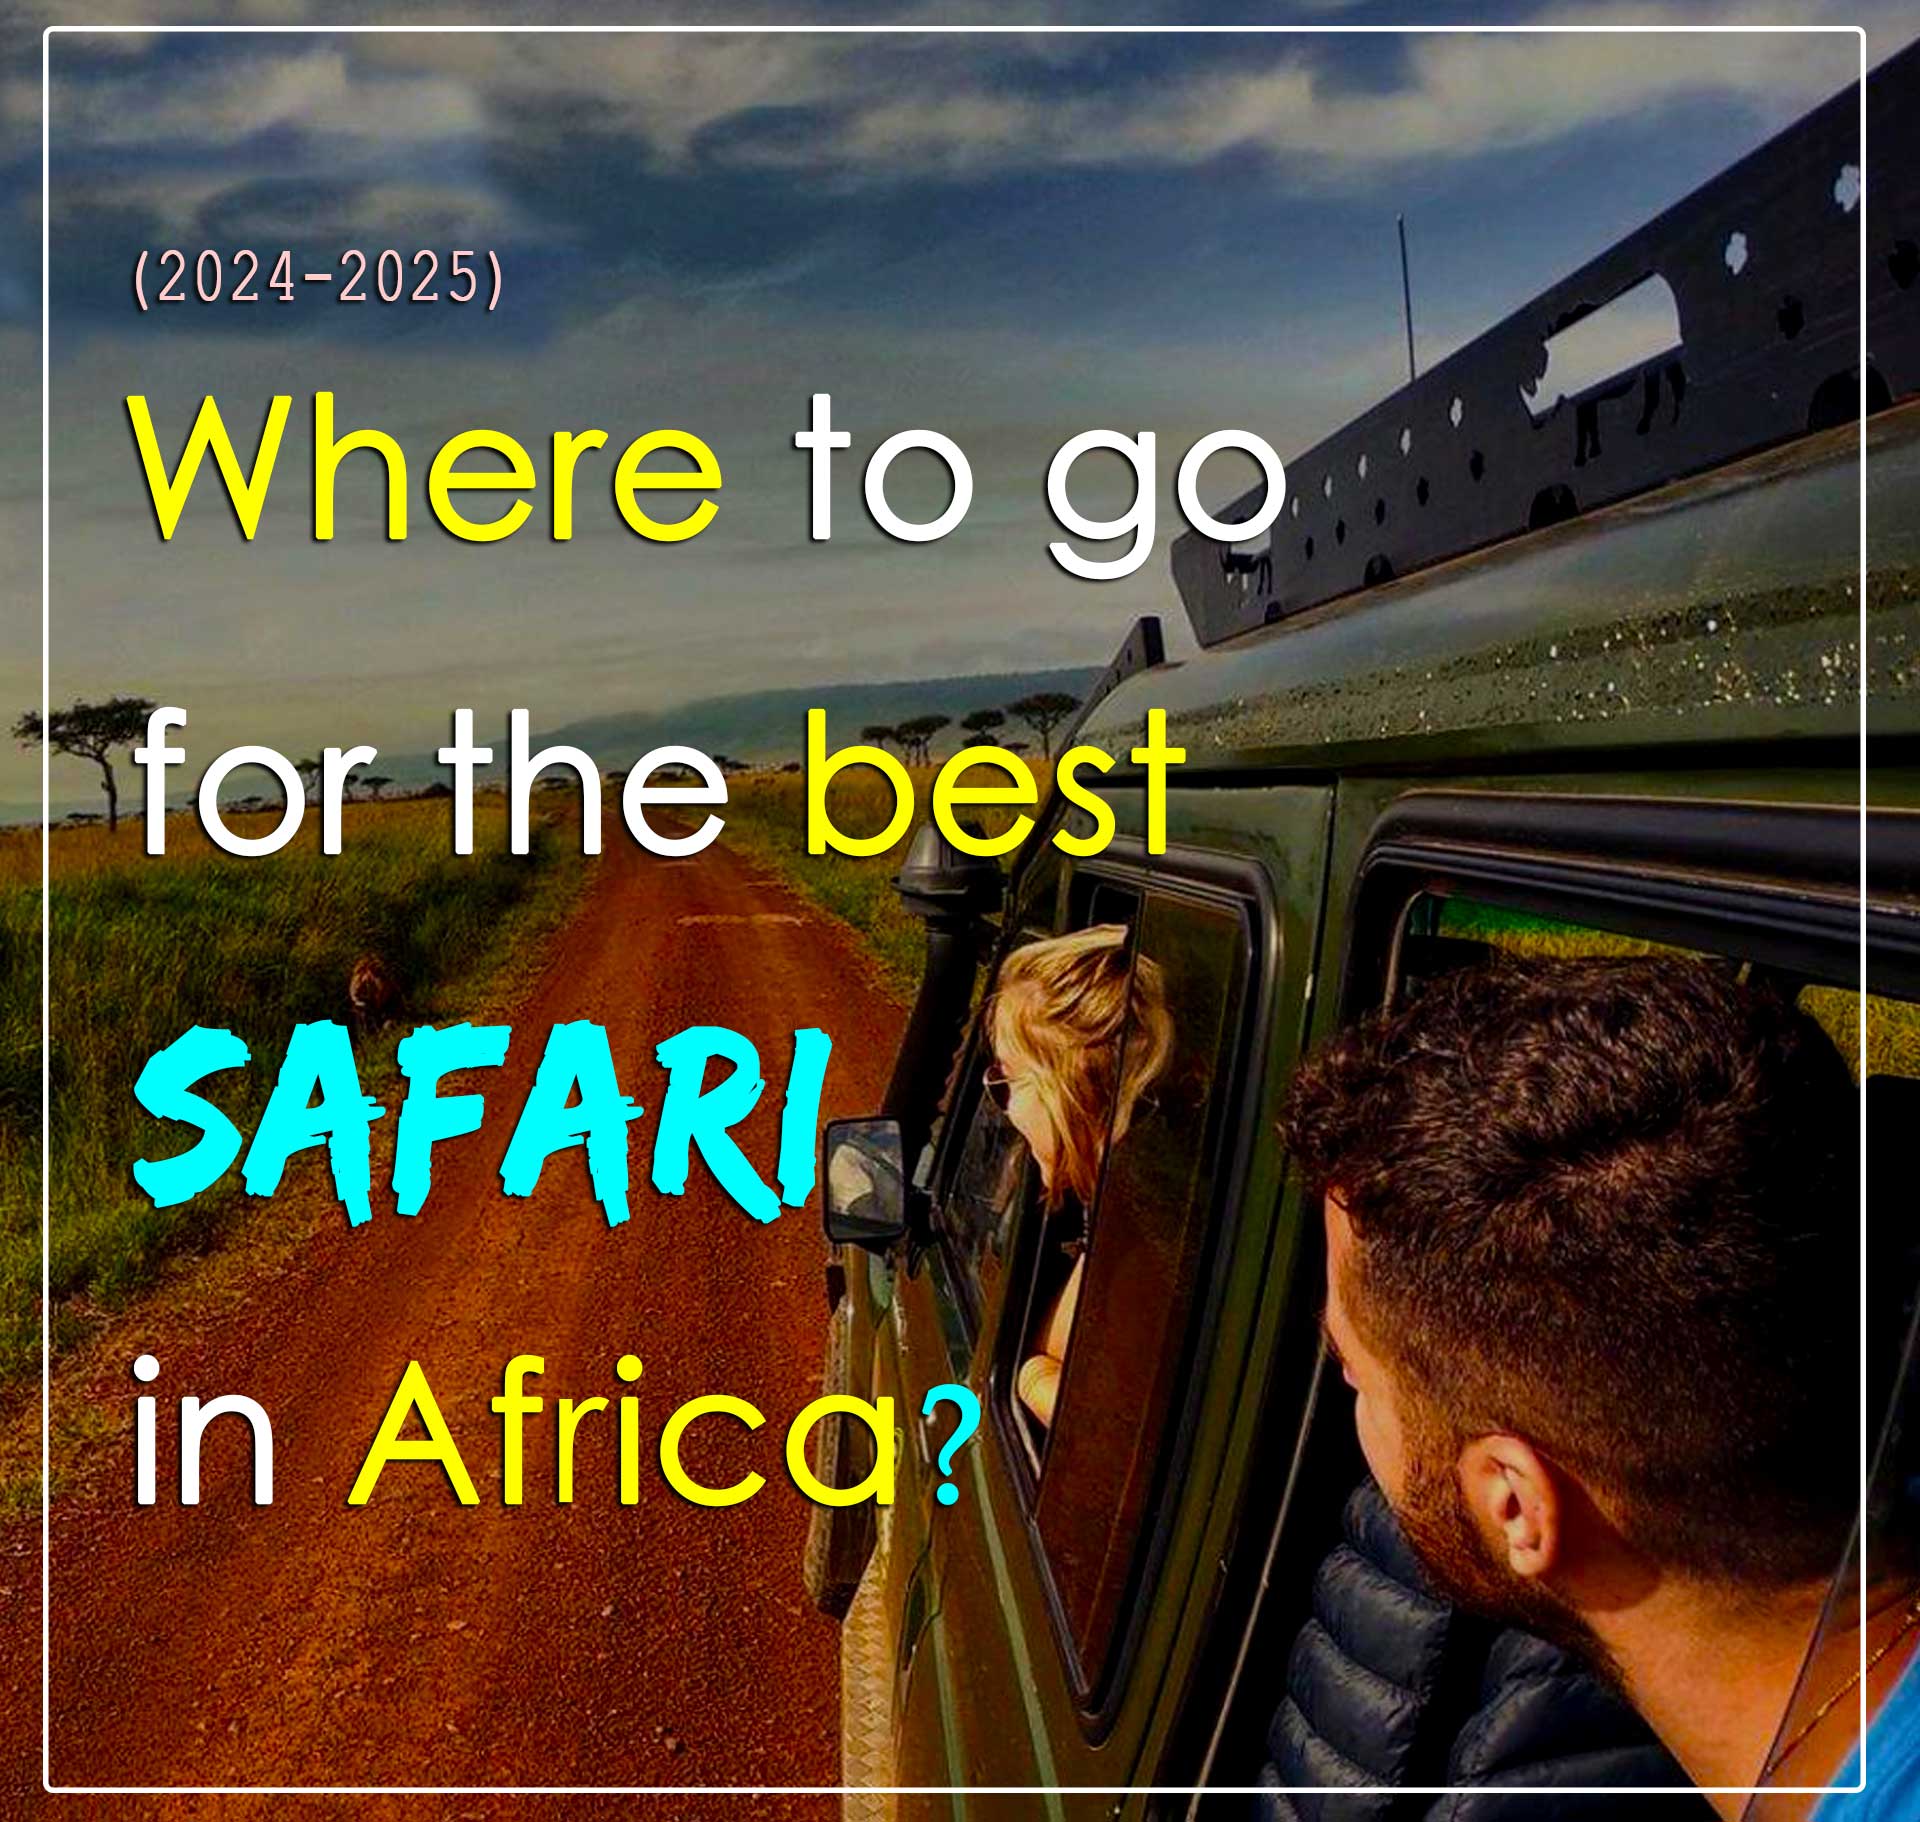 where-to-go-for-the-best-safari-in-Africa-2024-2025